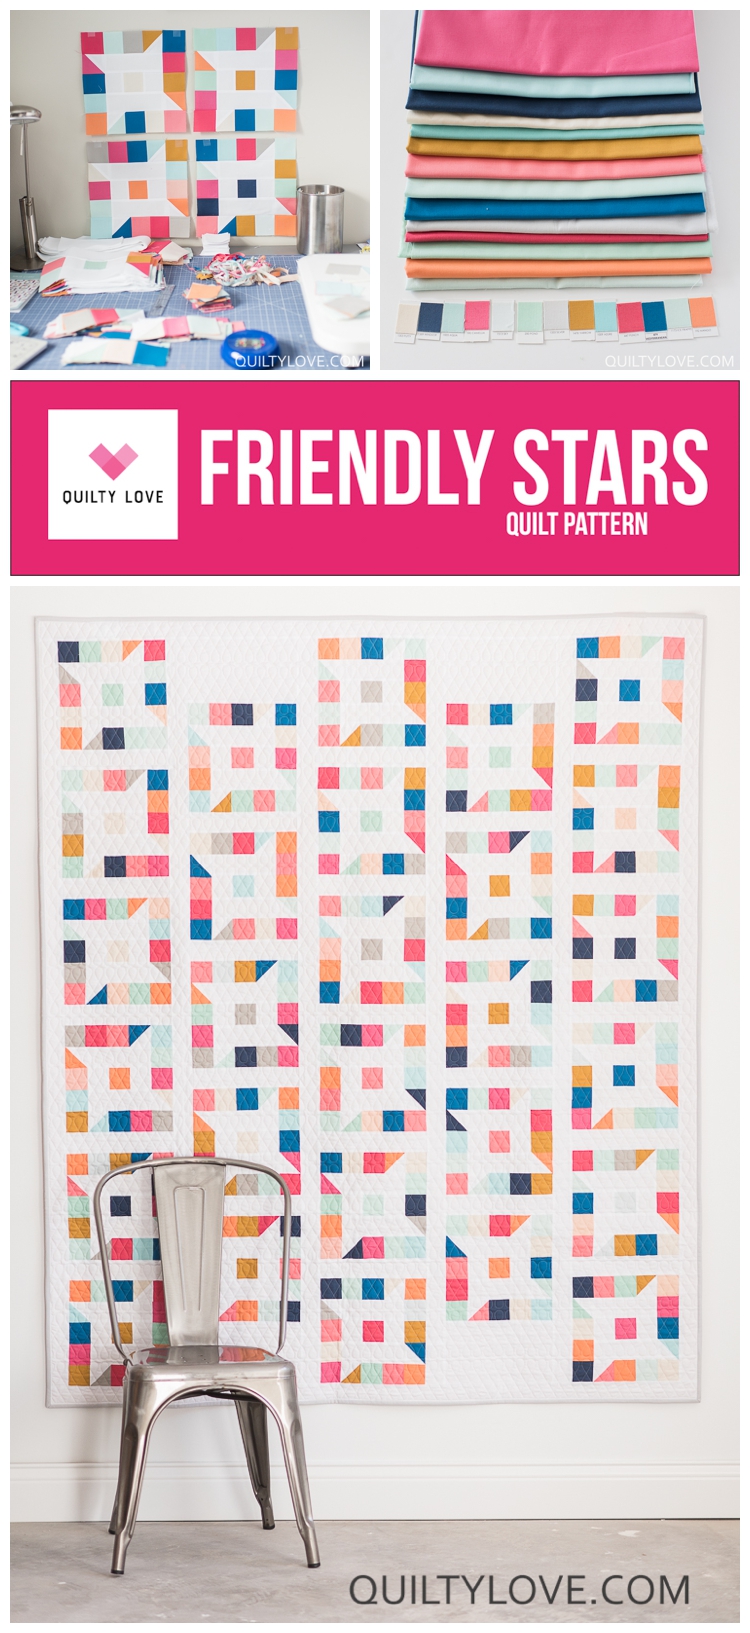 Friendly stars quilt pattern by Emily of quiltylove.com